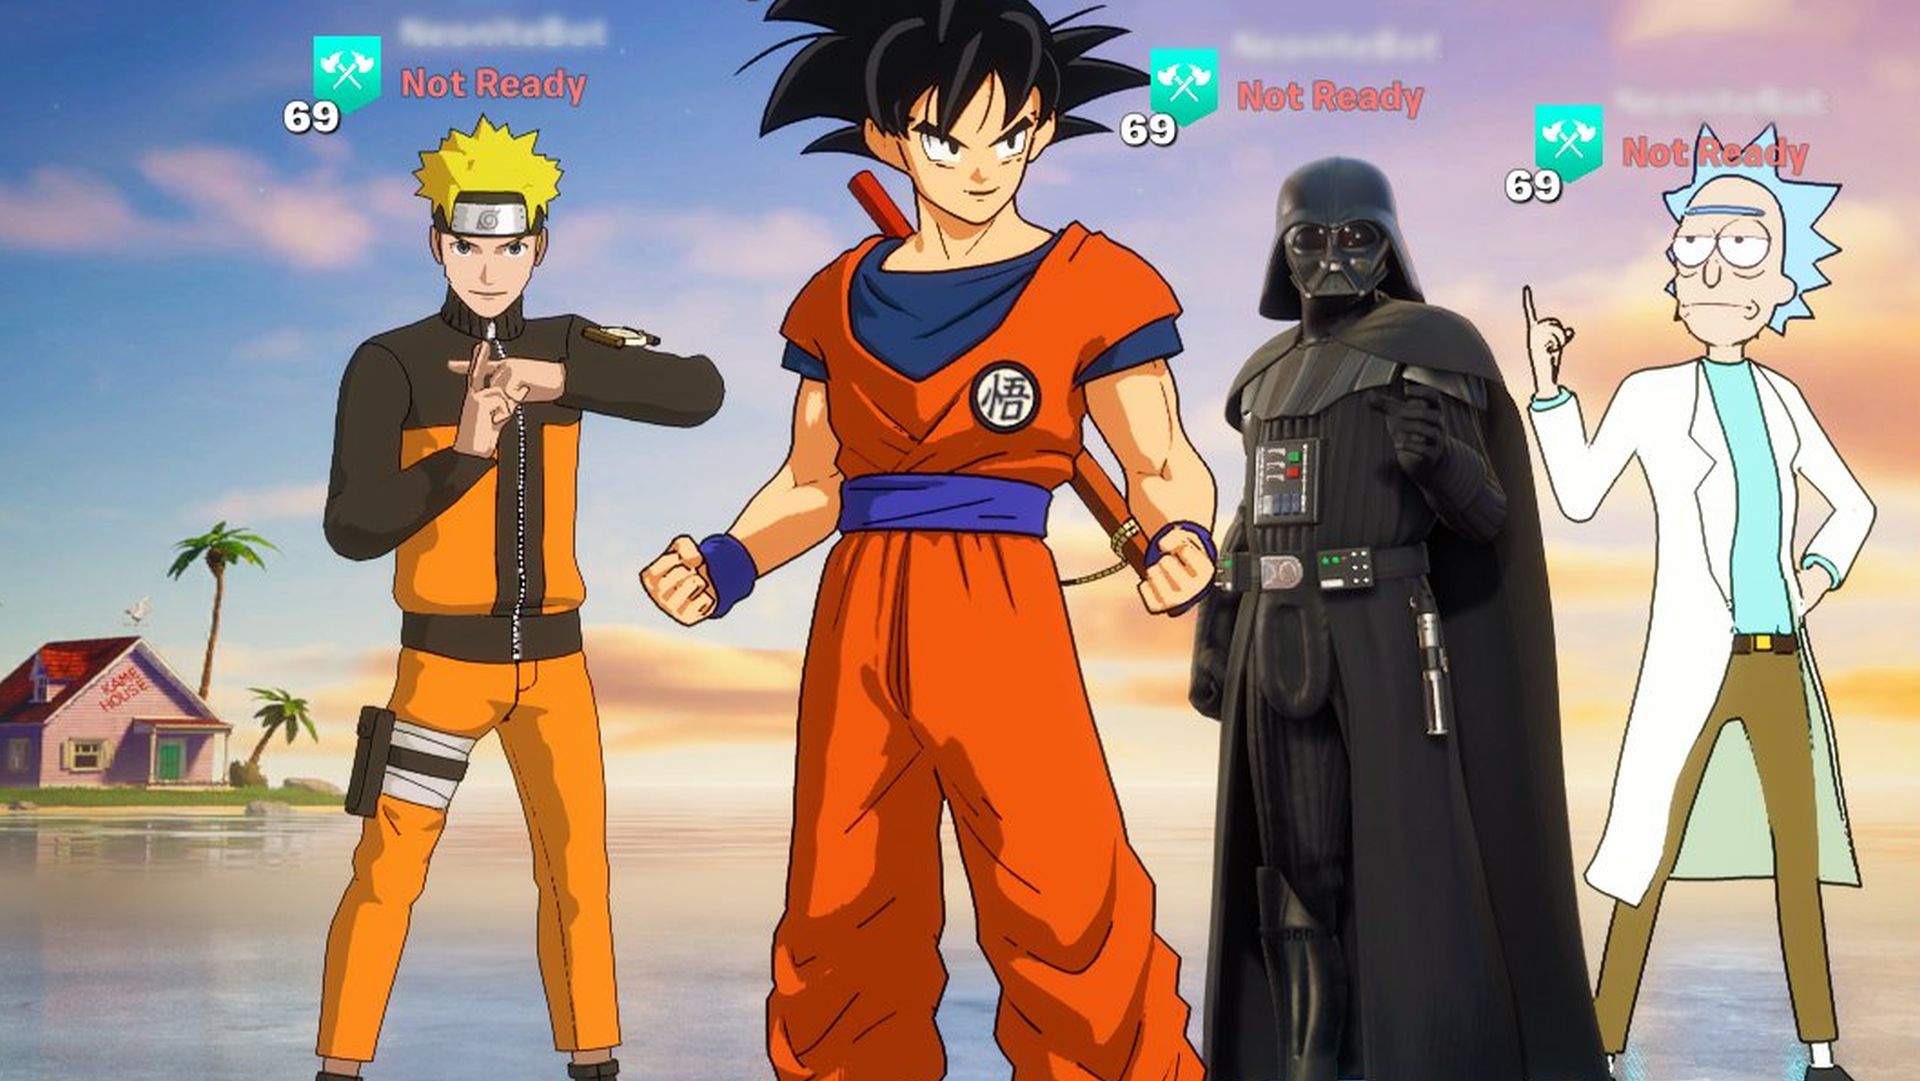 Darth Vader as an anime character from Dragon Ball Z.